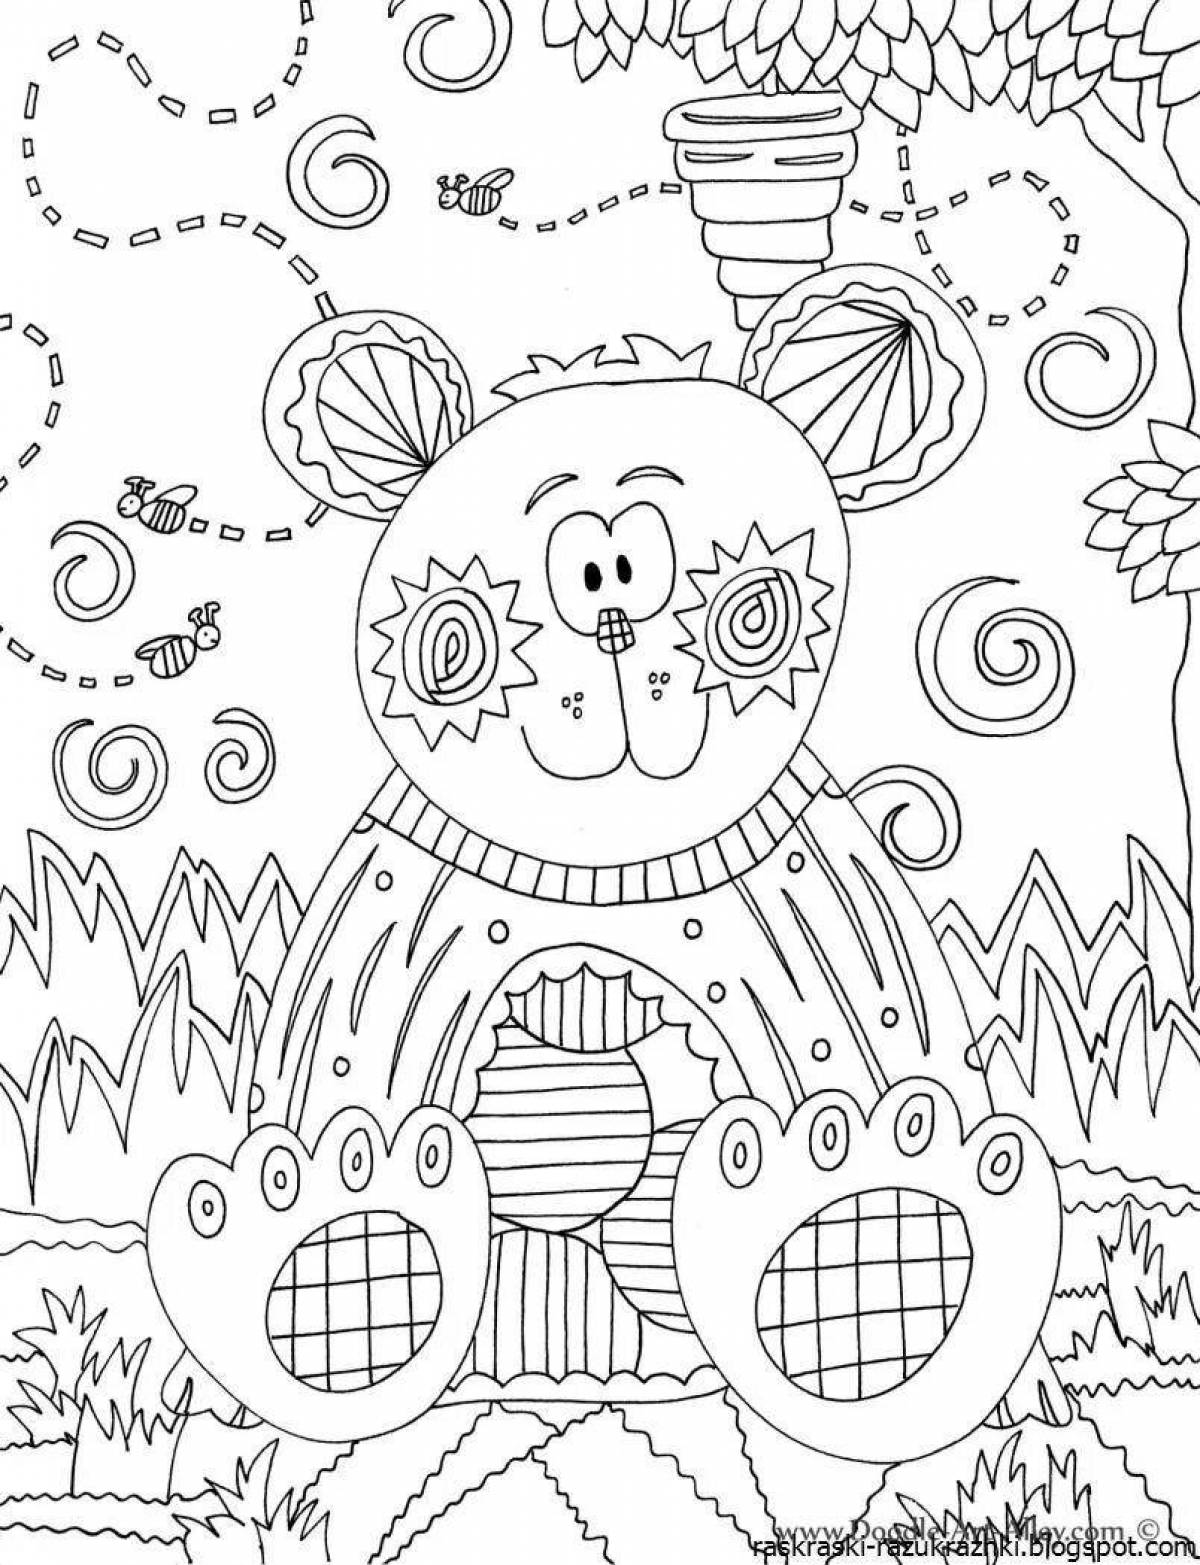 Animated antistress baby coloring book